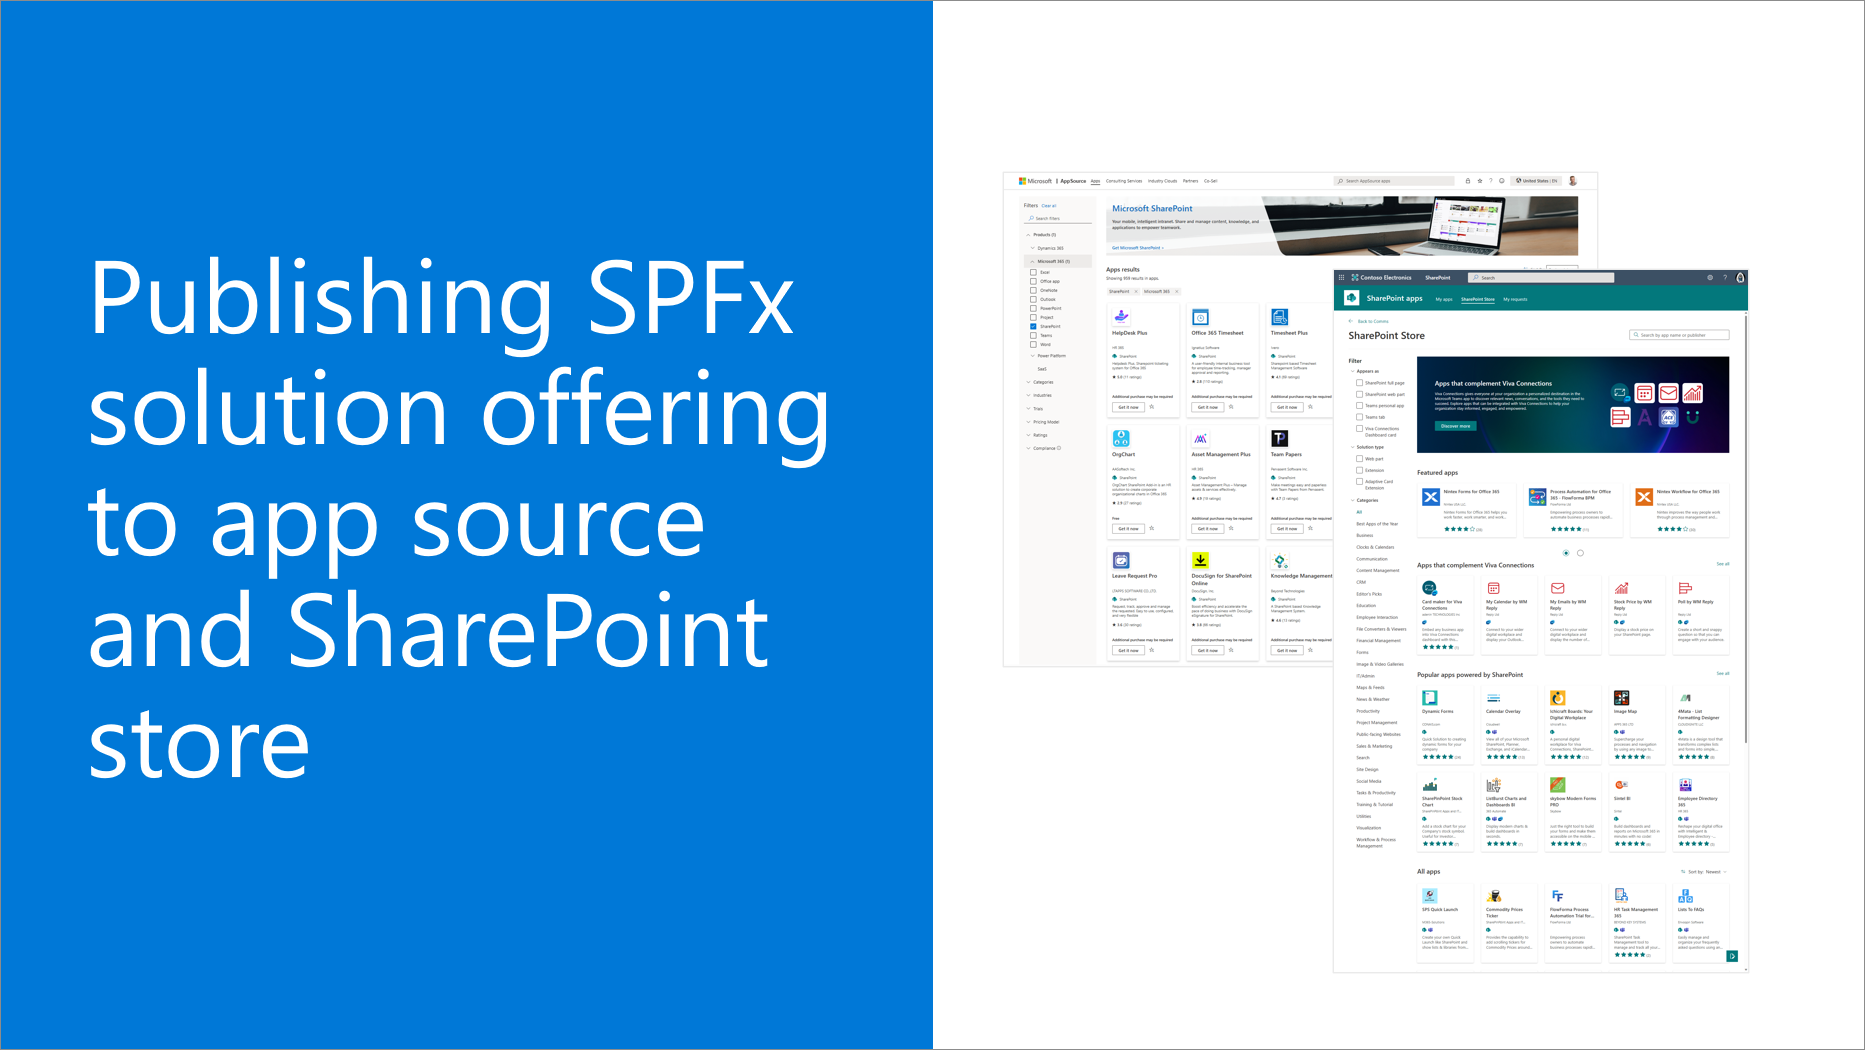 Publishing SPFx solution offerings to app source and SharePoint store